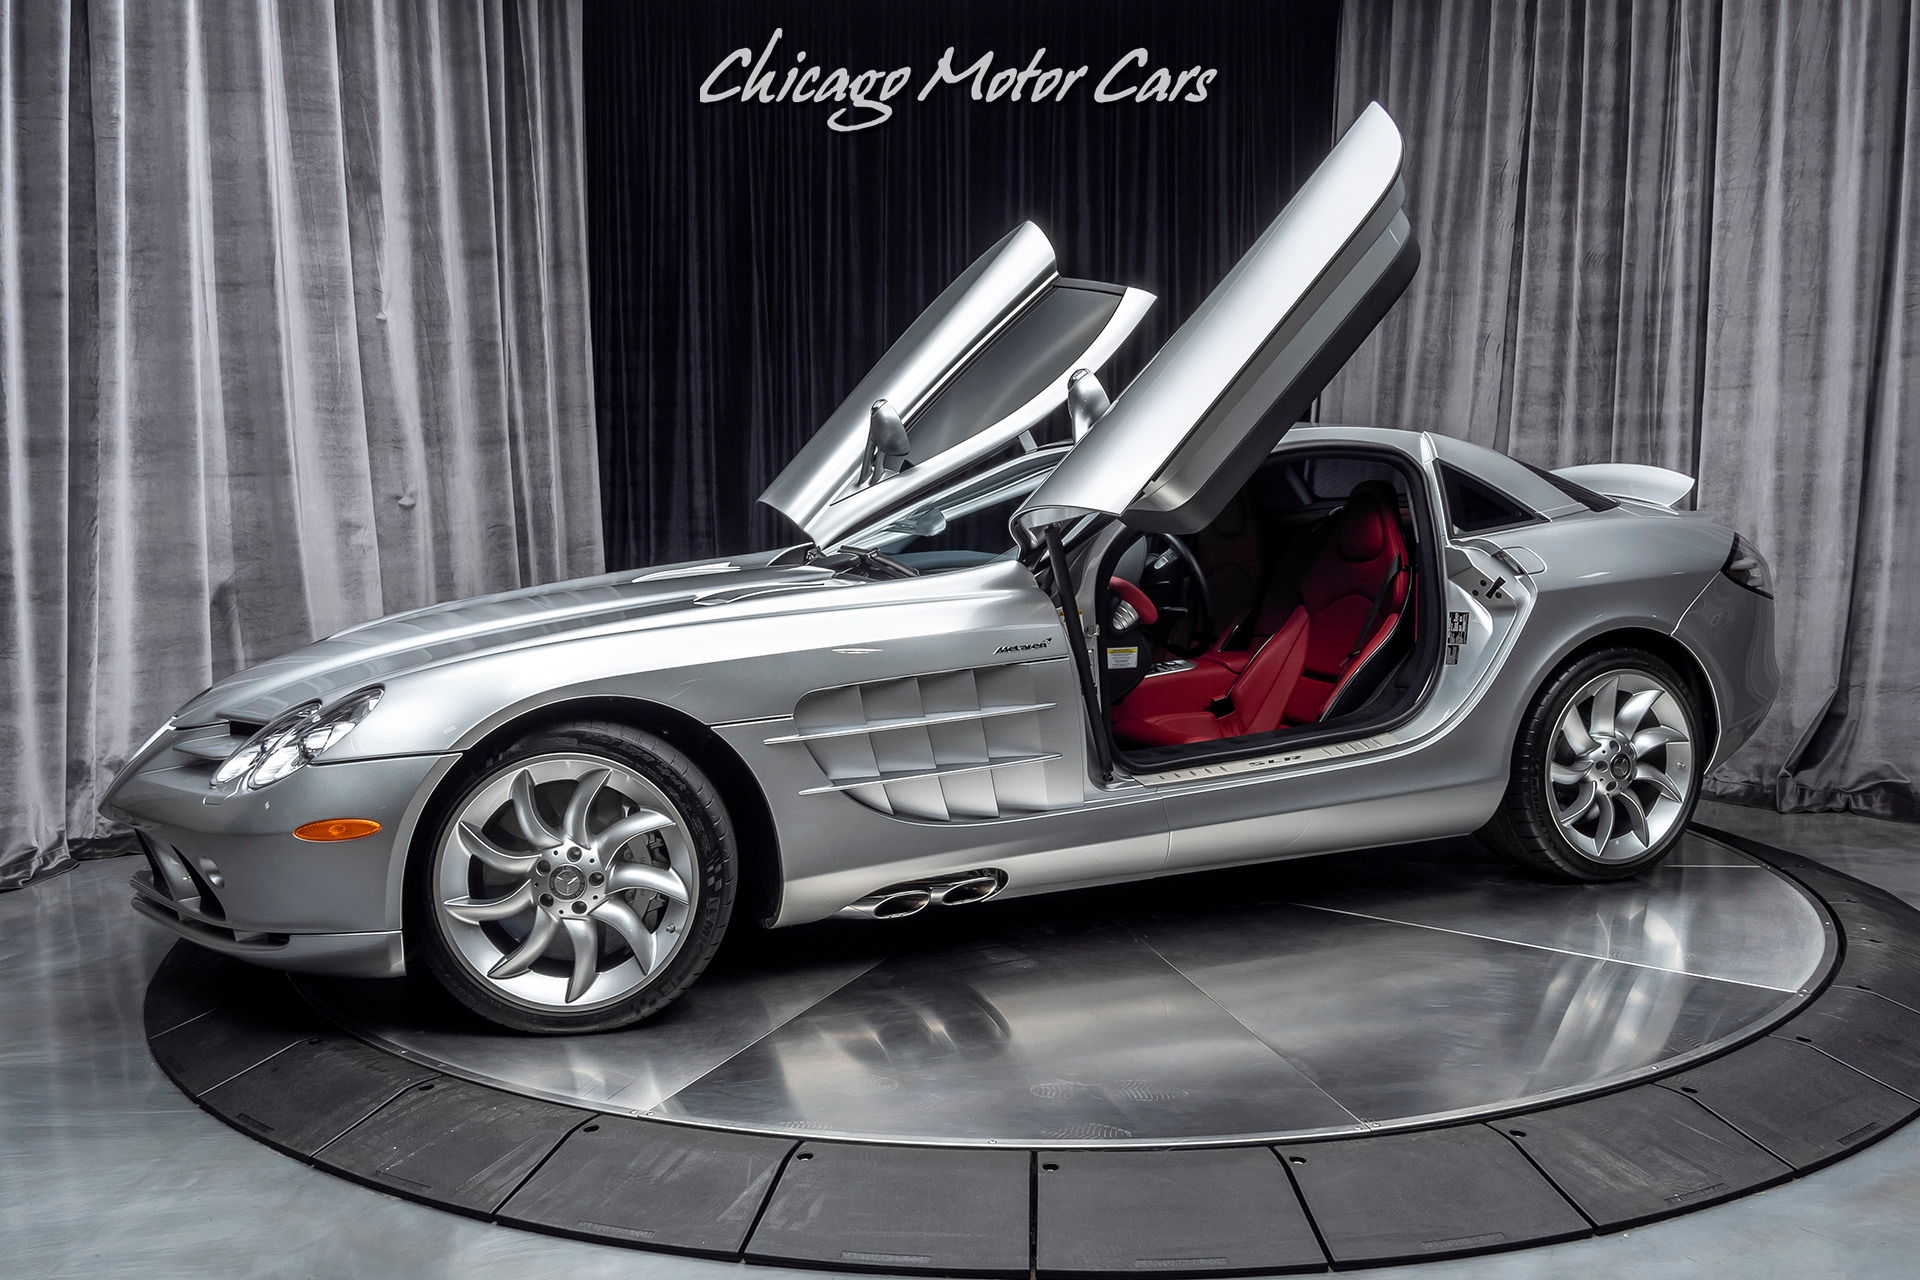 Used 2006 Mercedes-Benz SLR McLaren Coupe ONLY 2200 Miles! SERVICED! RARE &  DESIRED! For Sale (Special Pricing) | Chicago Motor Cars Stock #16797